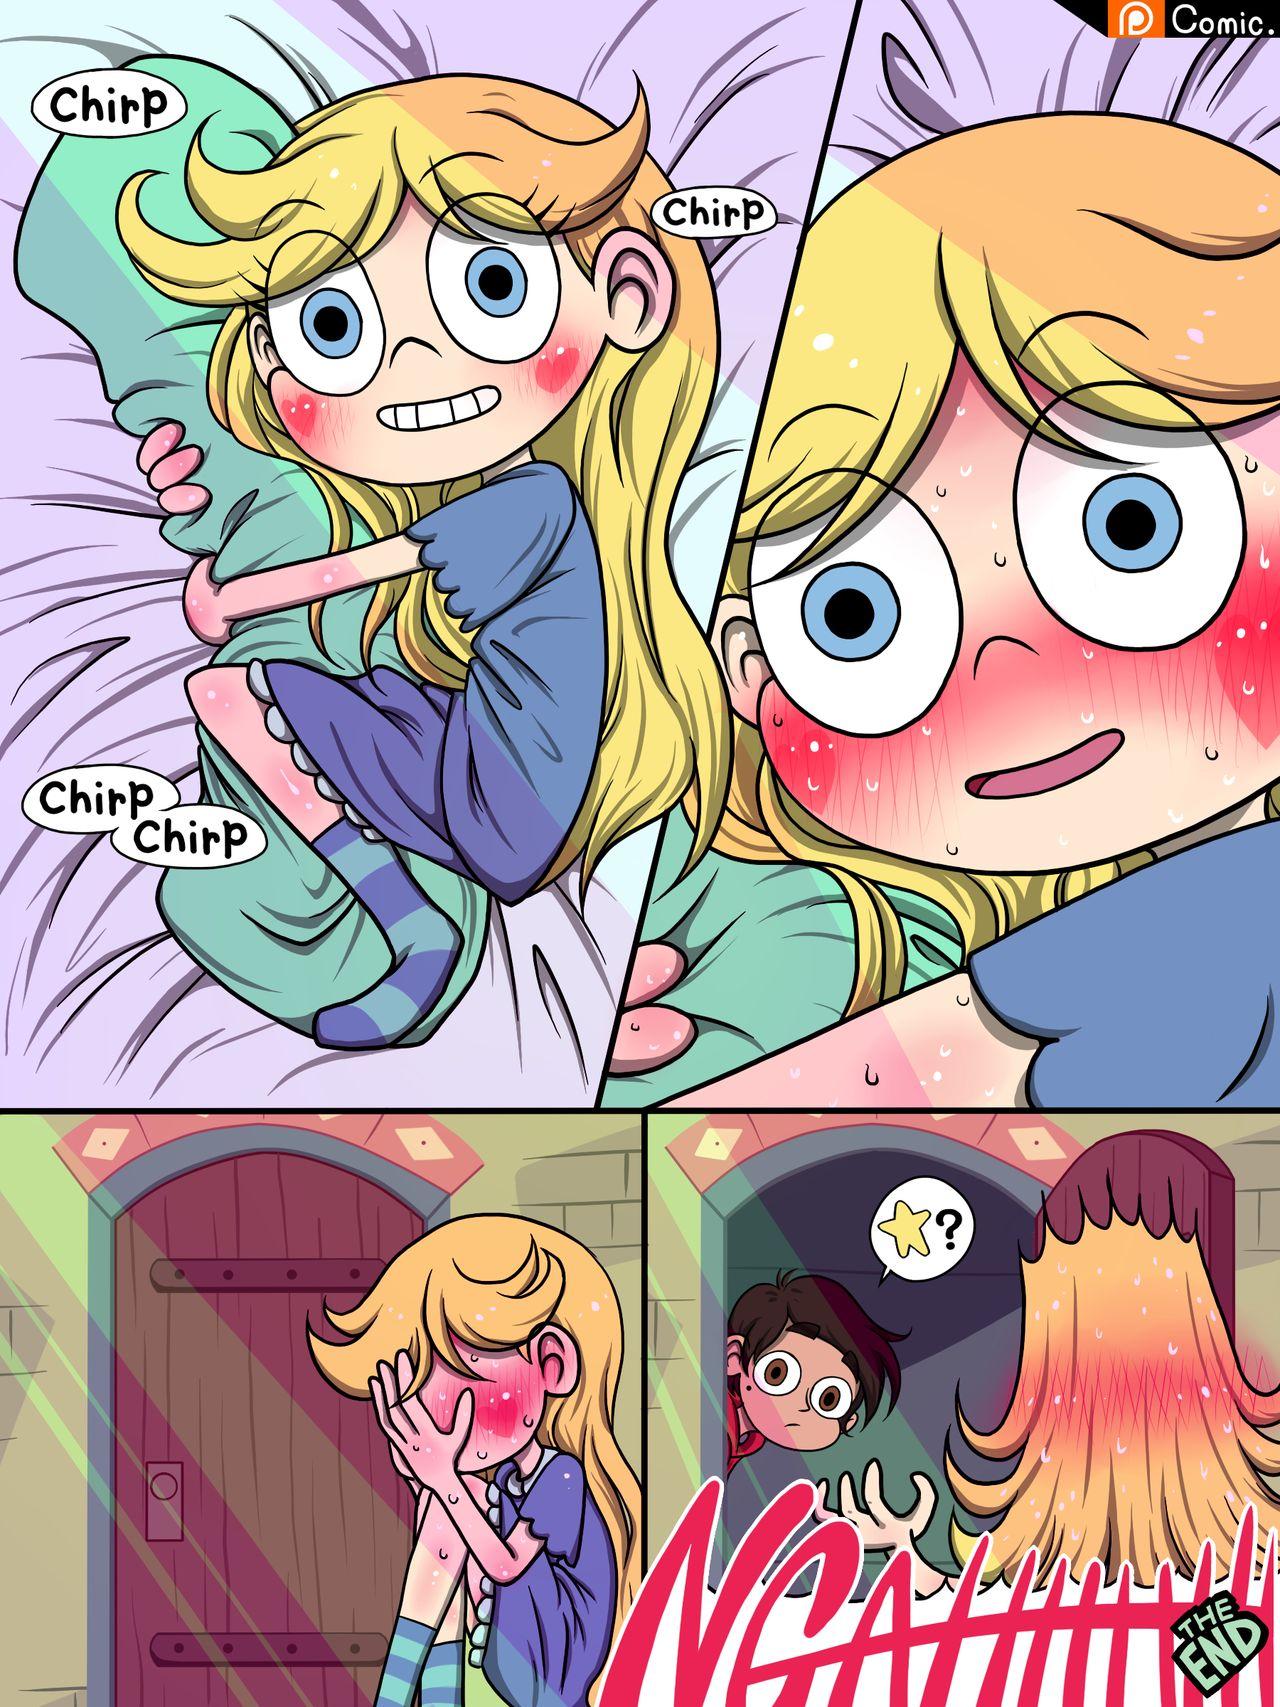 Latin Foces of Dream - Star vs. the forces of evil Sapphicerotica - Page 8